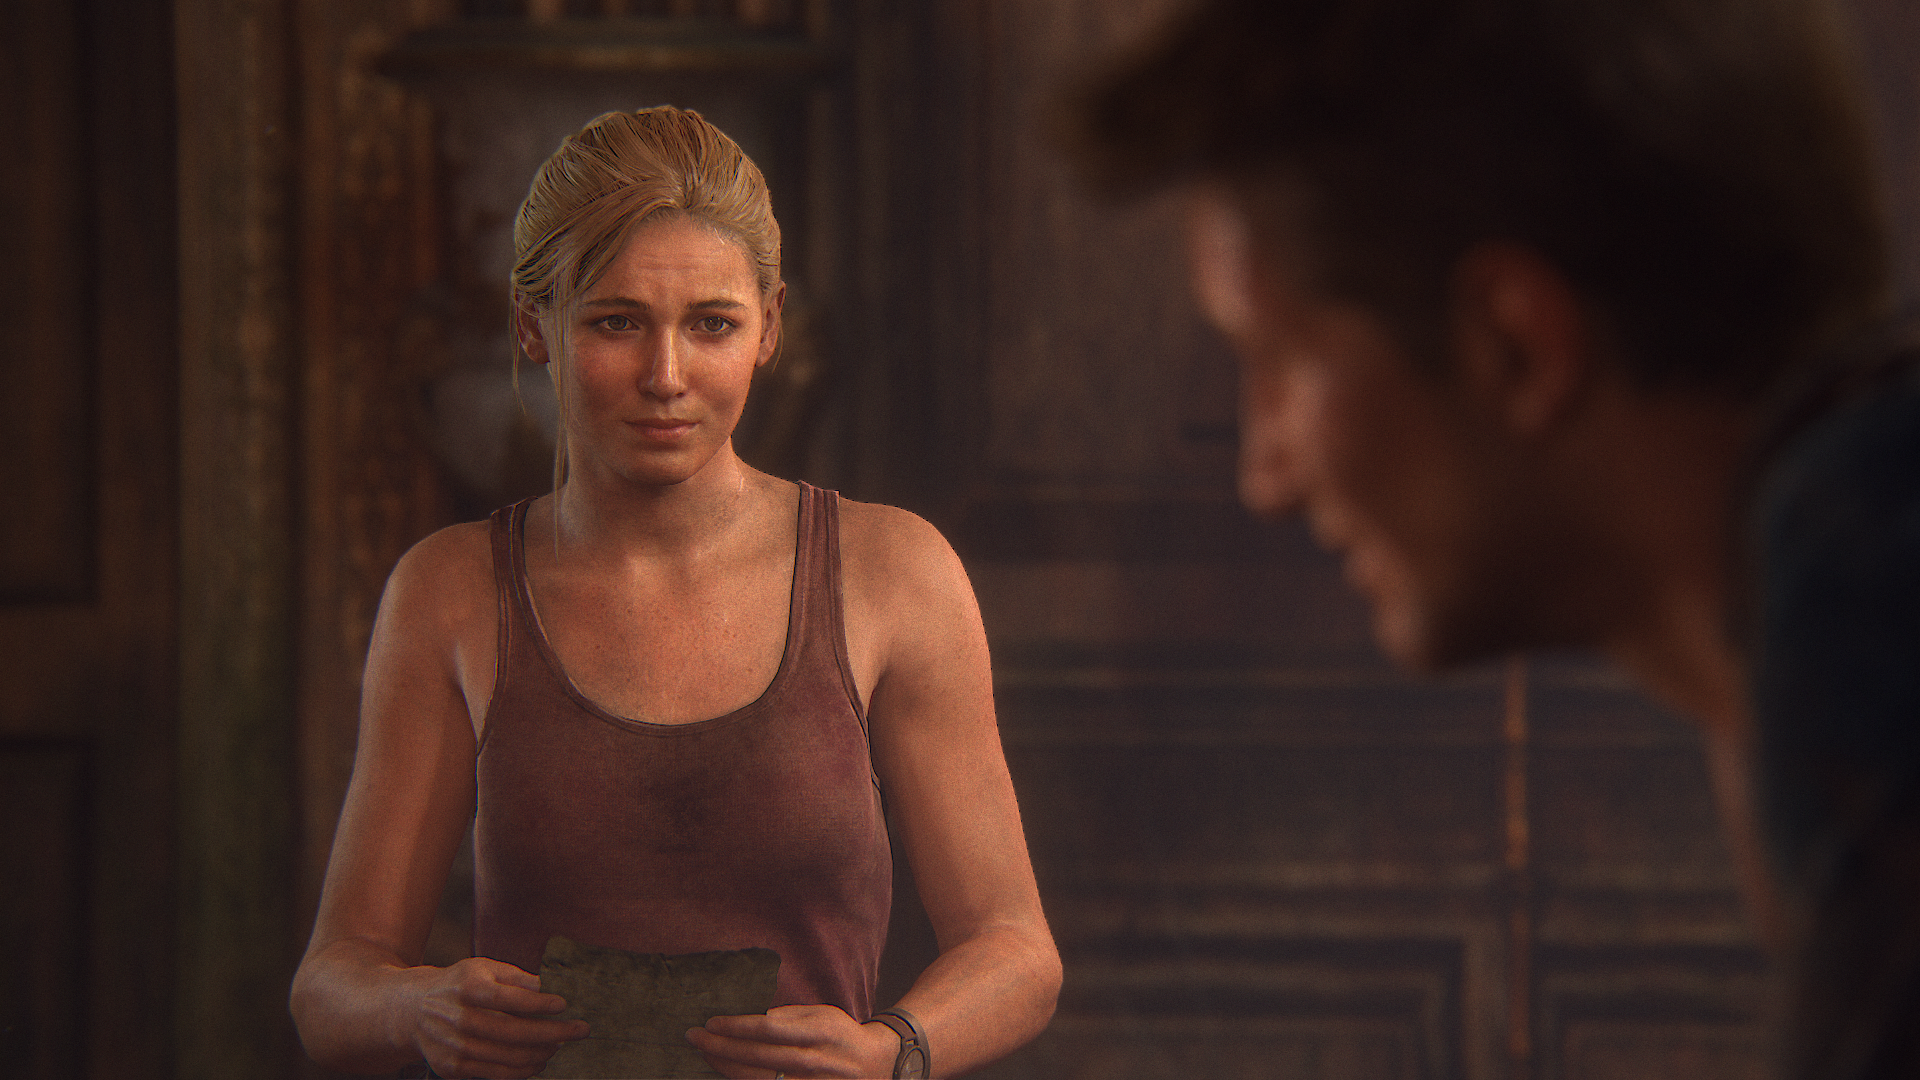 ba9Uncharted4AThiefsEnd.png